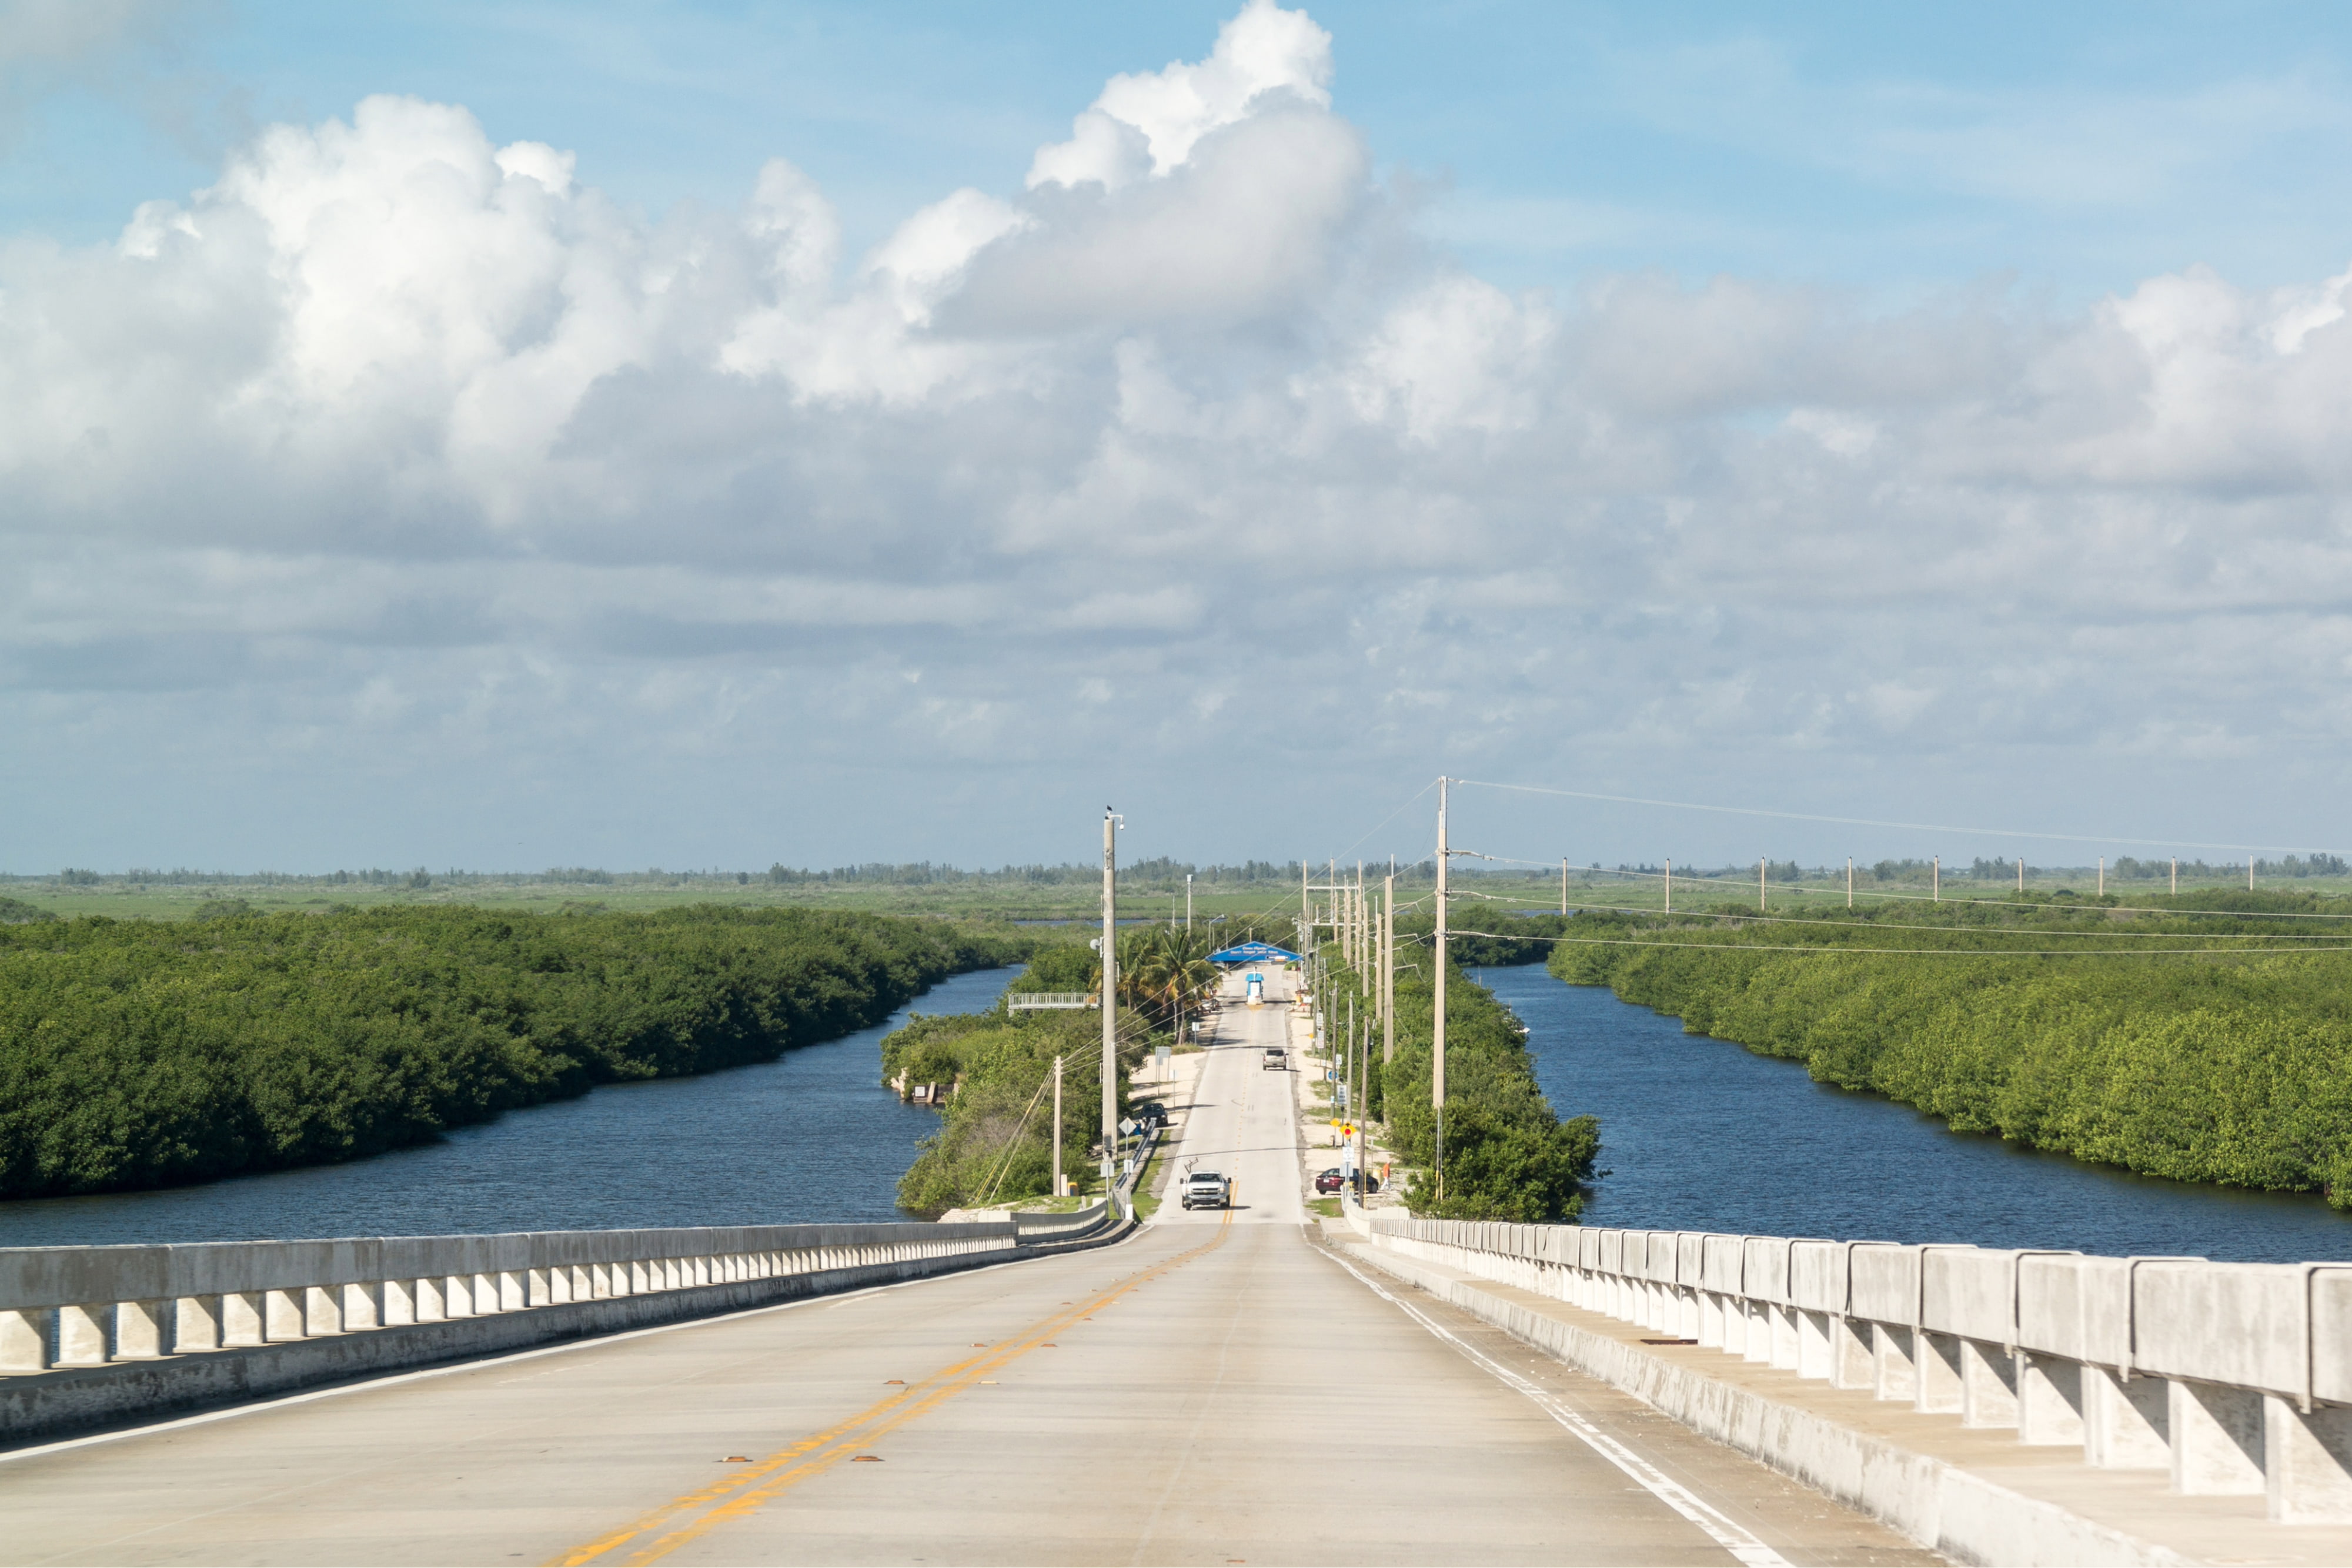 Card Sound Road toll plaza from bridge, route from Key Largo, Florida Keys to Miami, USA